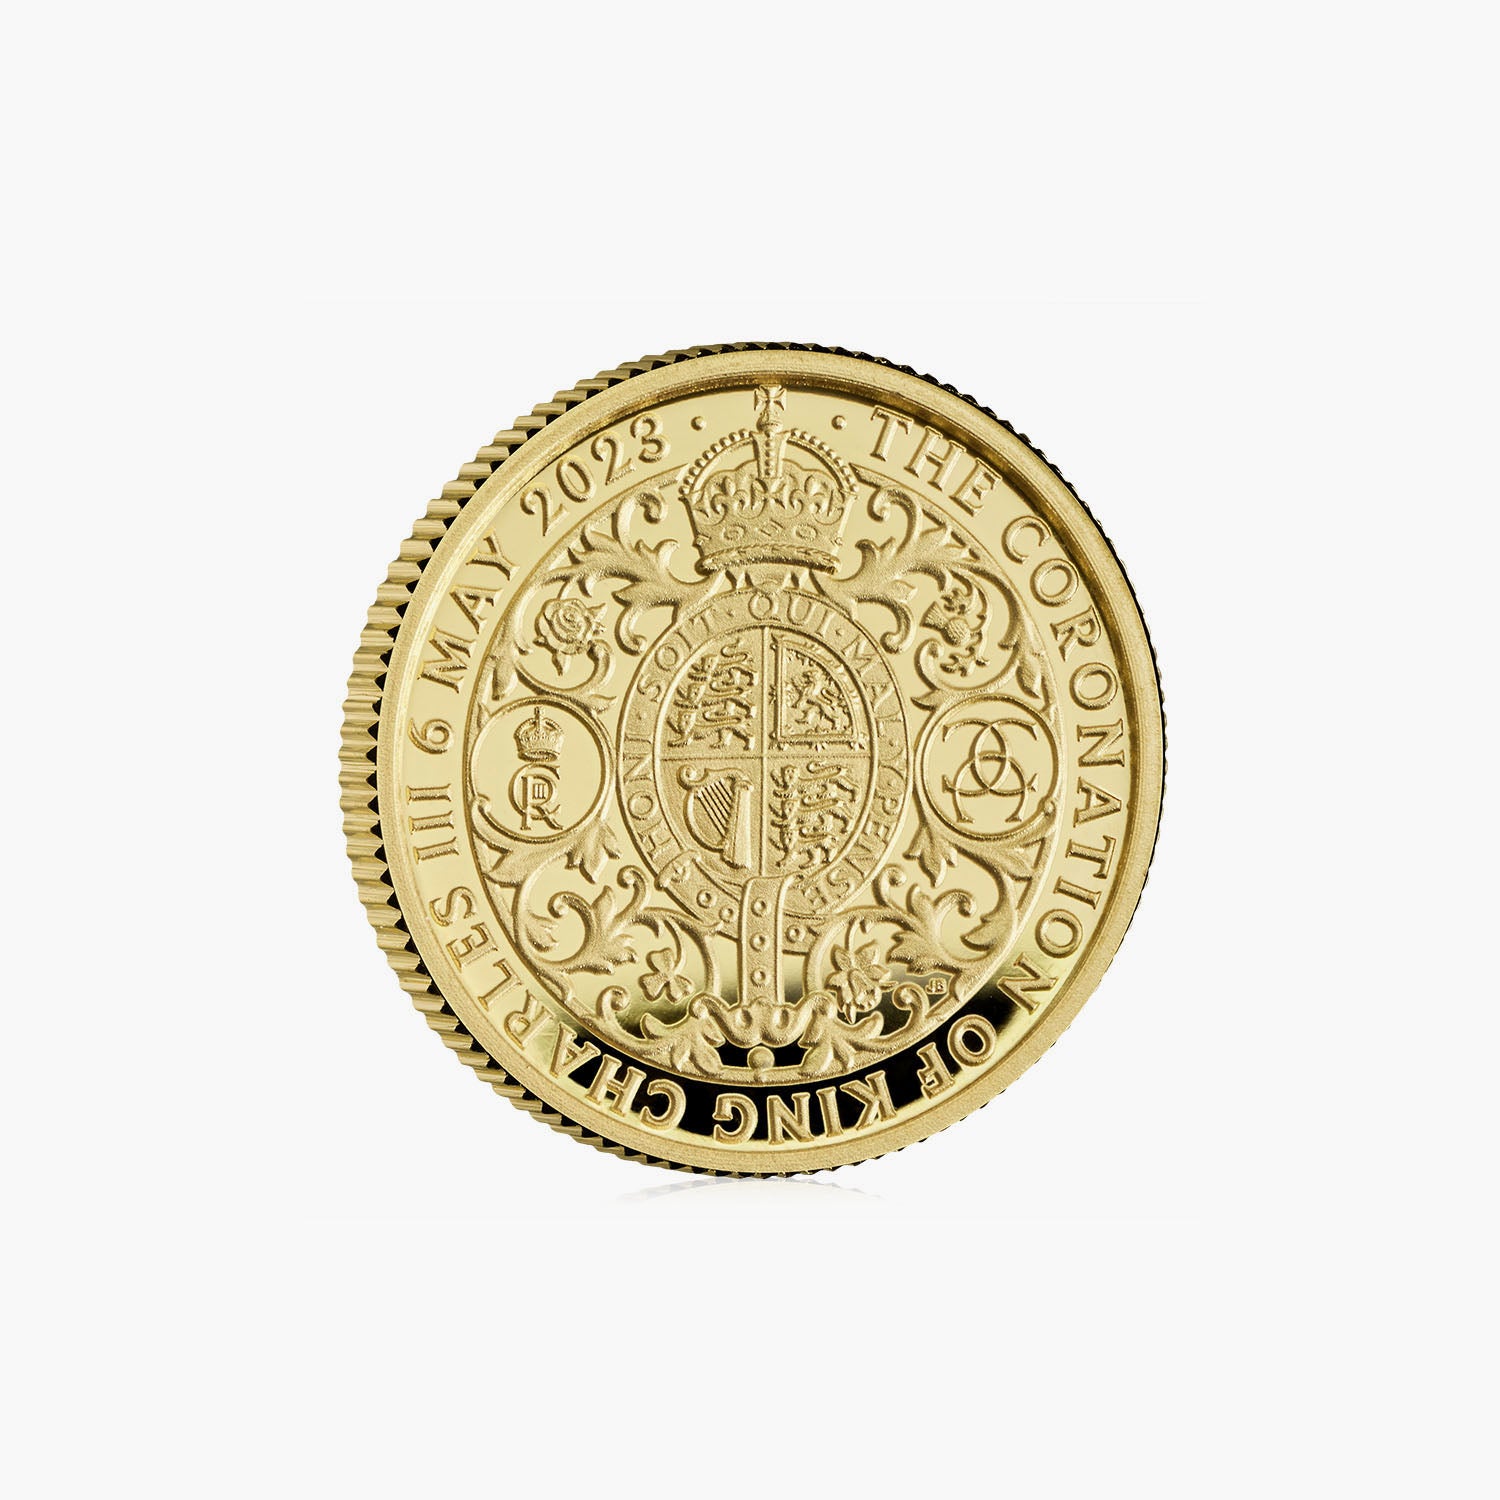 The Coronation of His Majesty King Charles 1/40th (0.8g) 50 Pence Solid Gold Proof